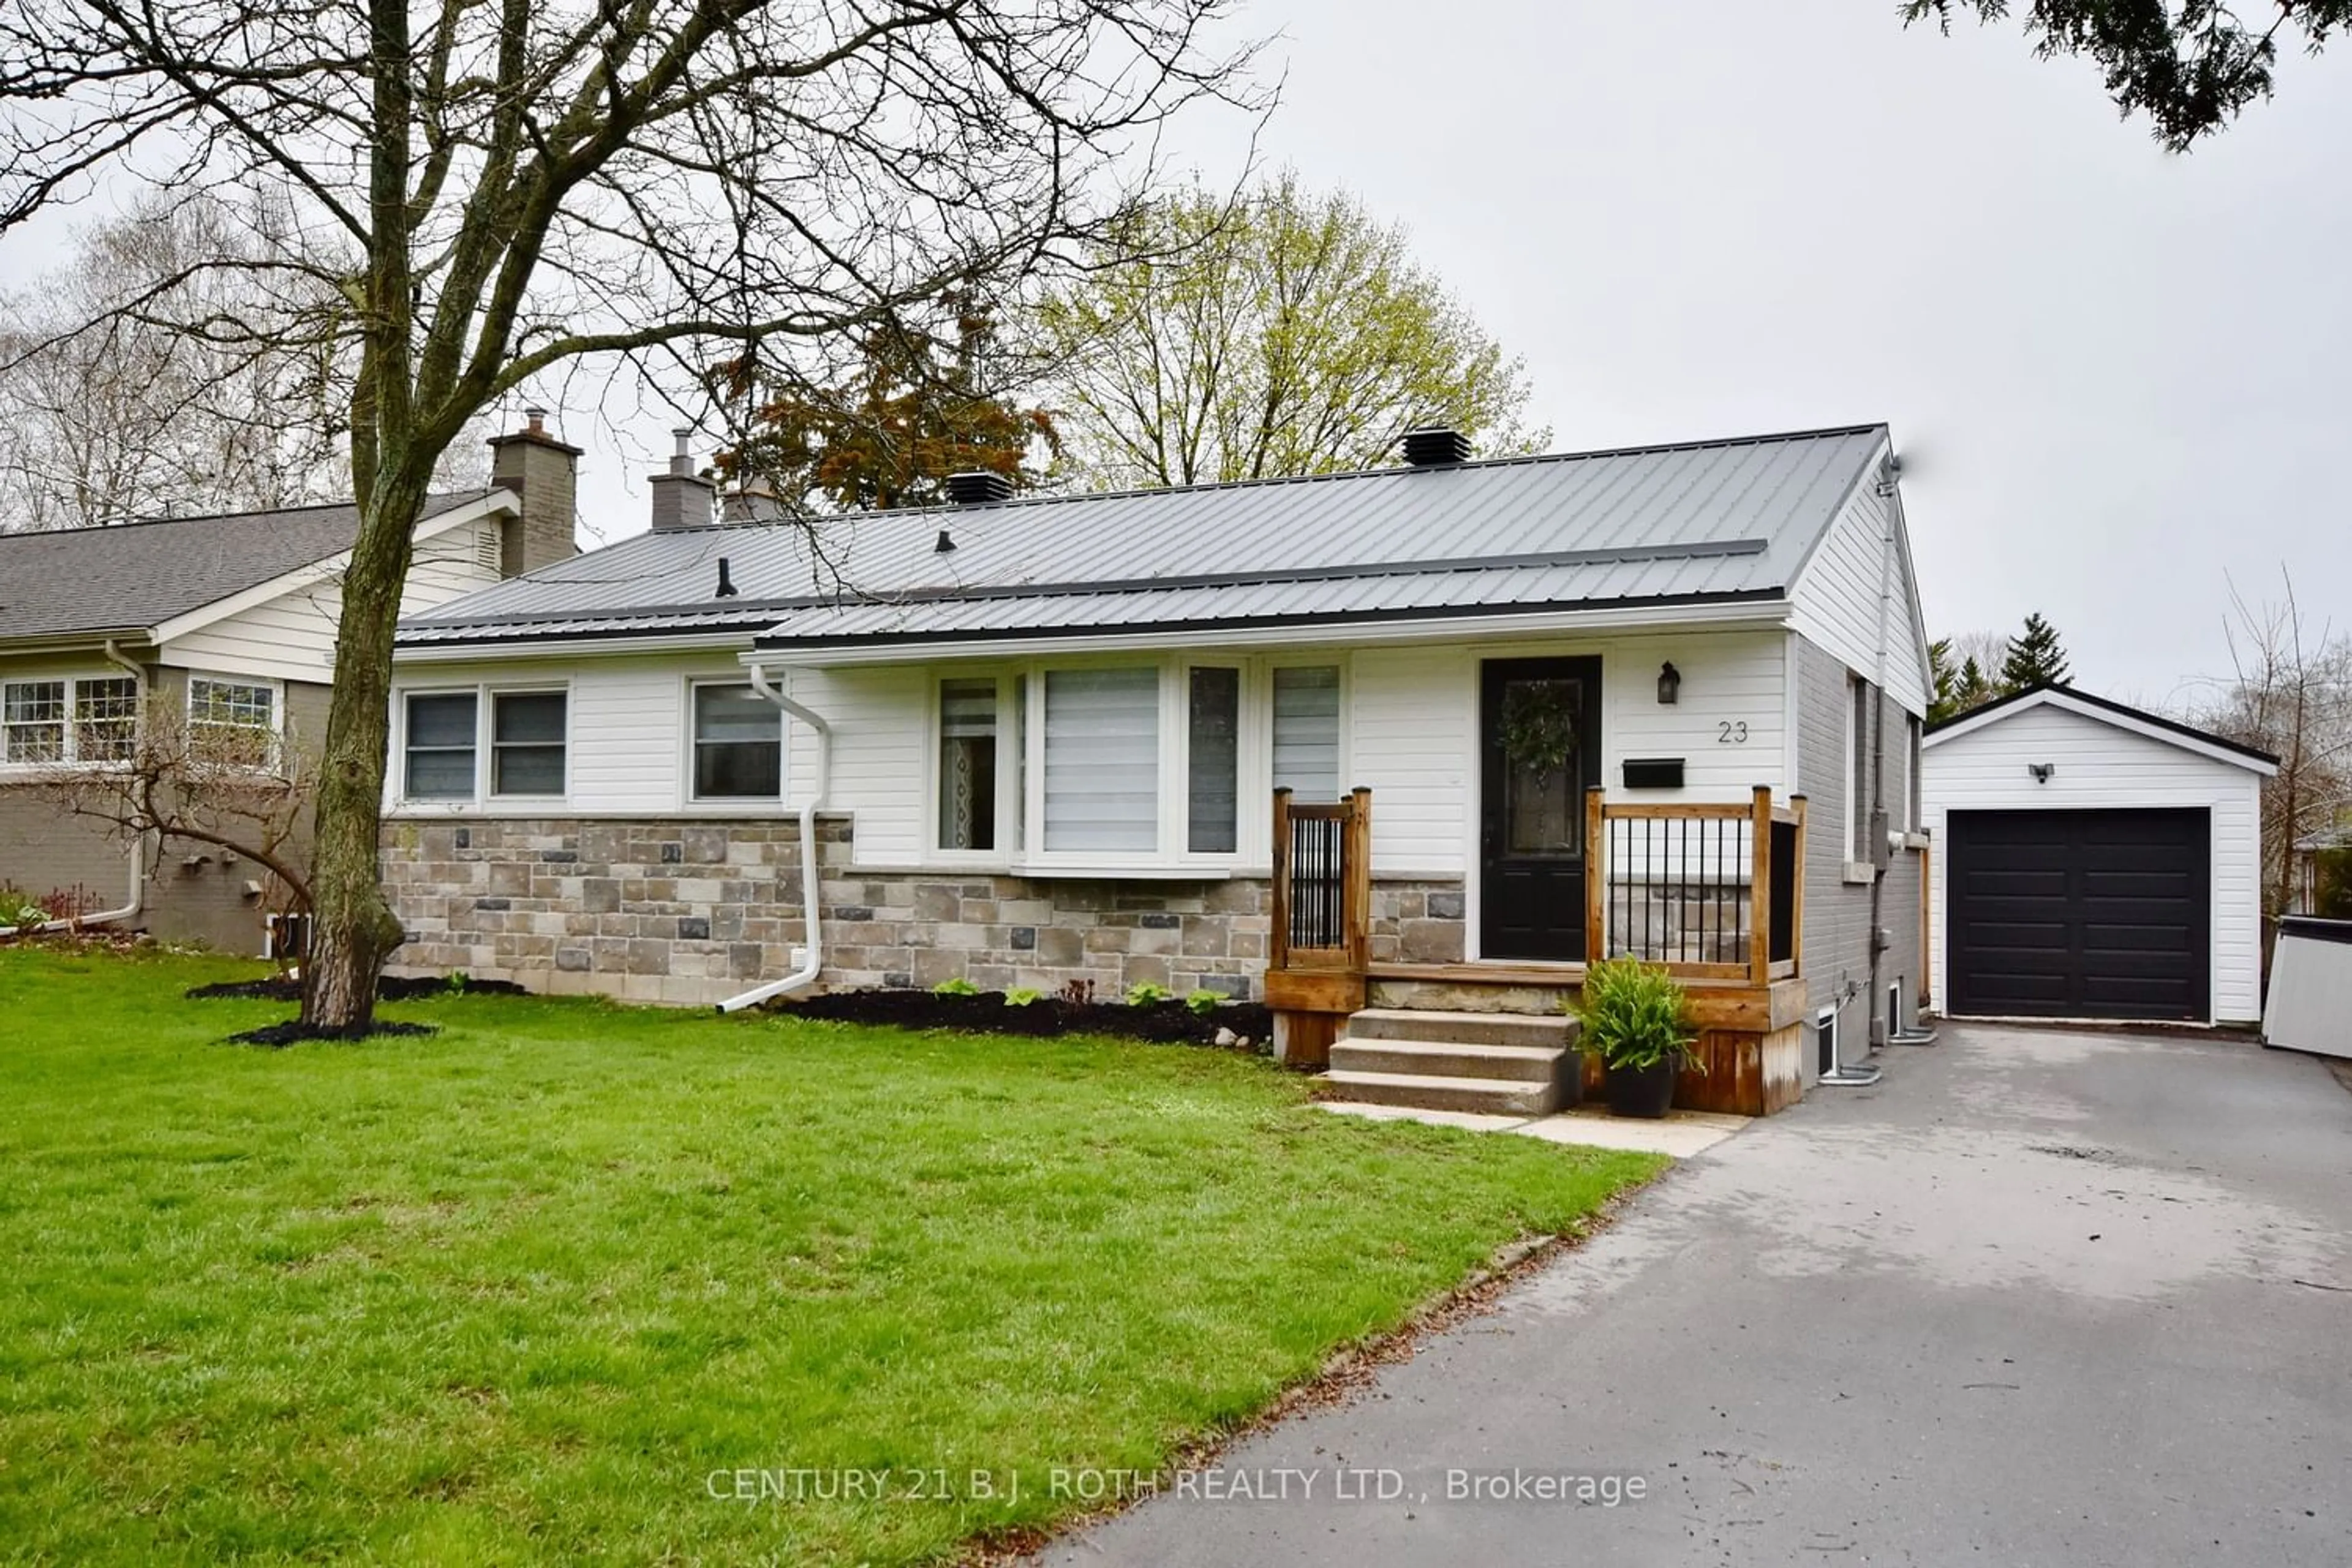 Frontside or backside of a home for 23 Weldon St, Barrie Ontario L4M 4J5